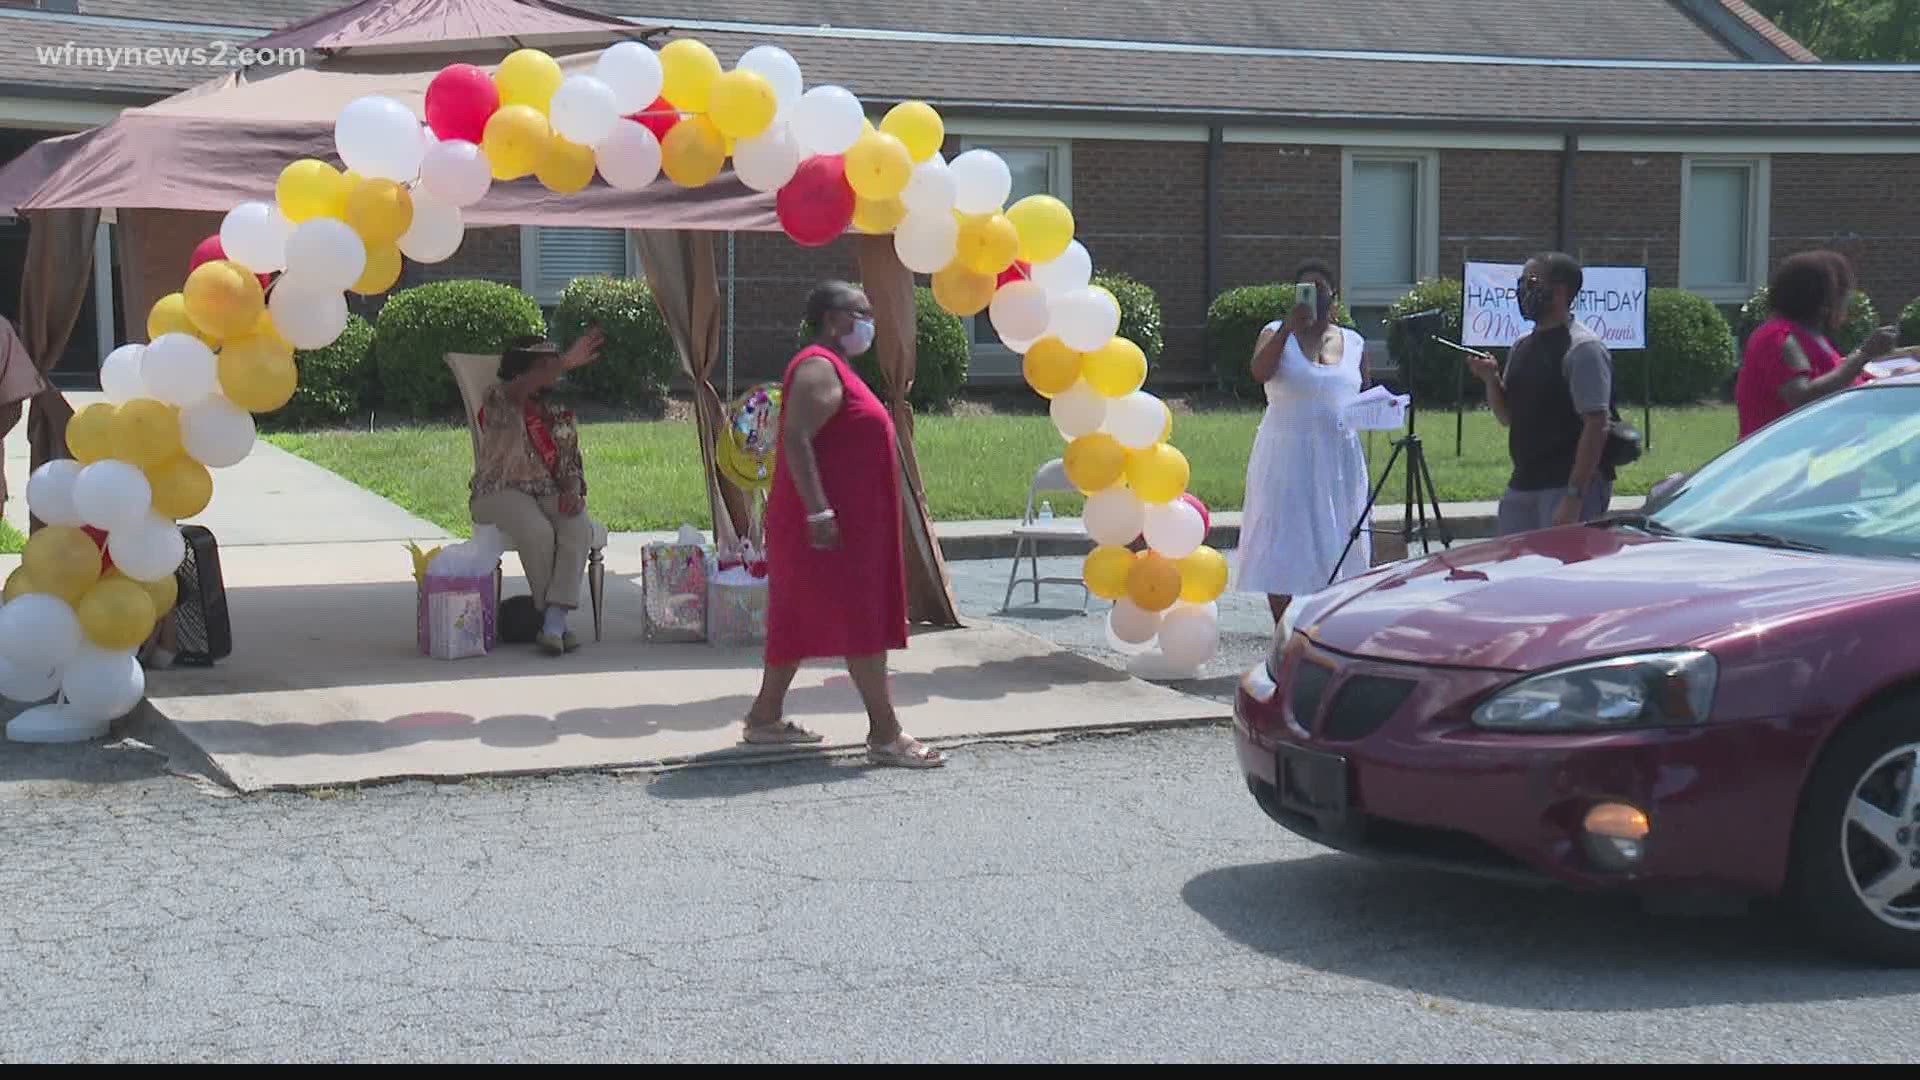 The family and friends of Erline Dennis all joined together to celebrate her 100th birthday through an honorary drive-thru parade.